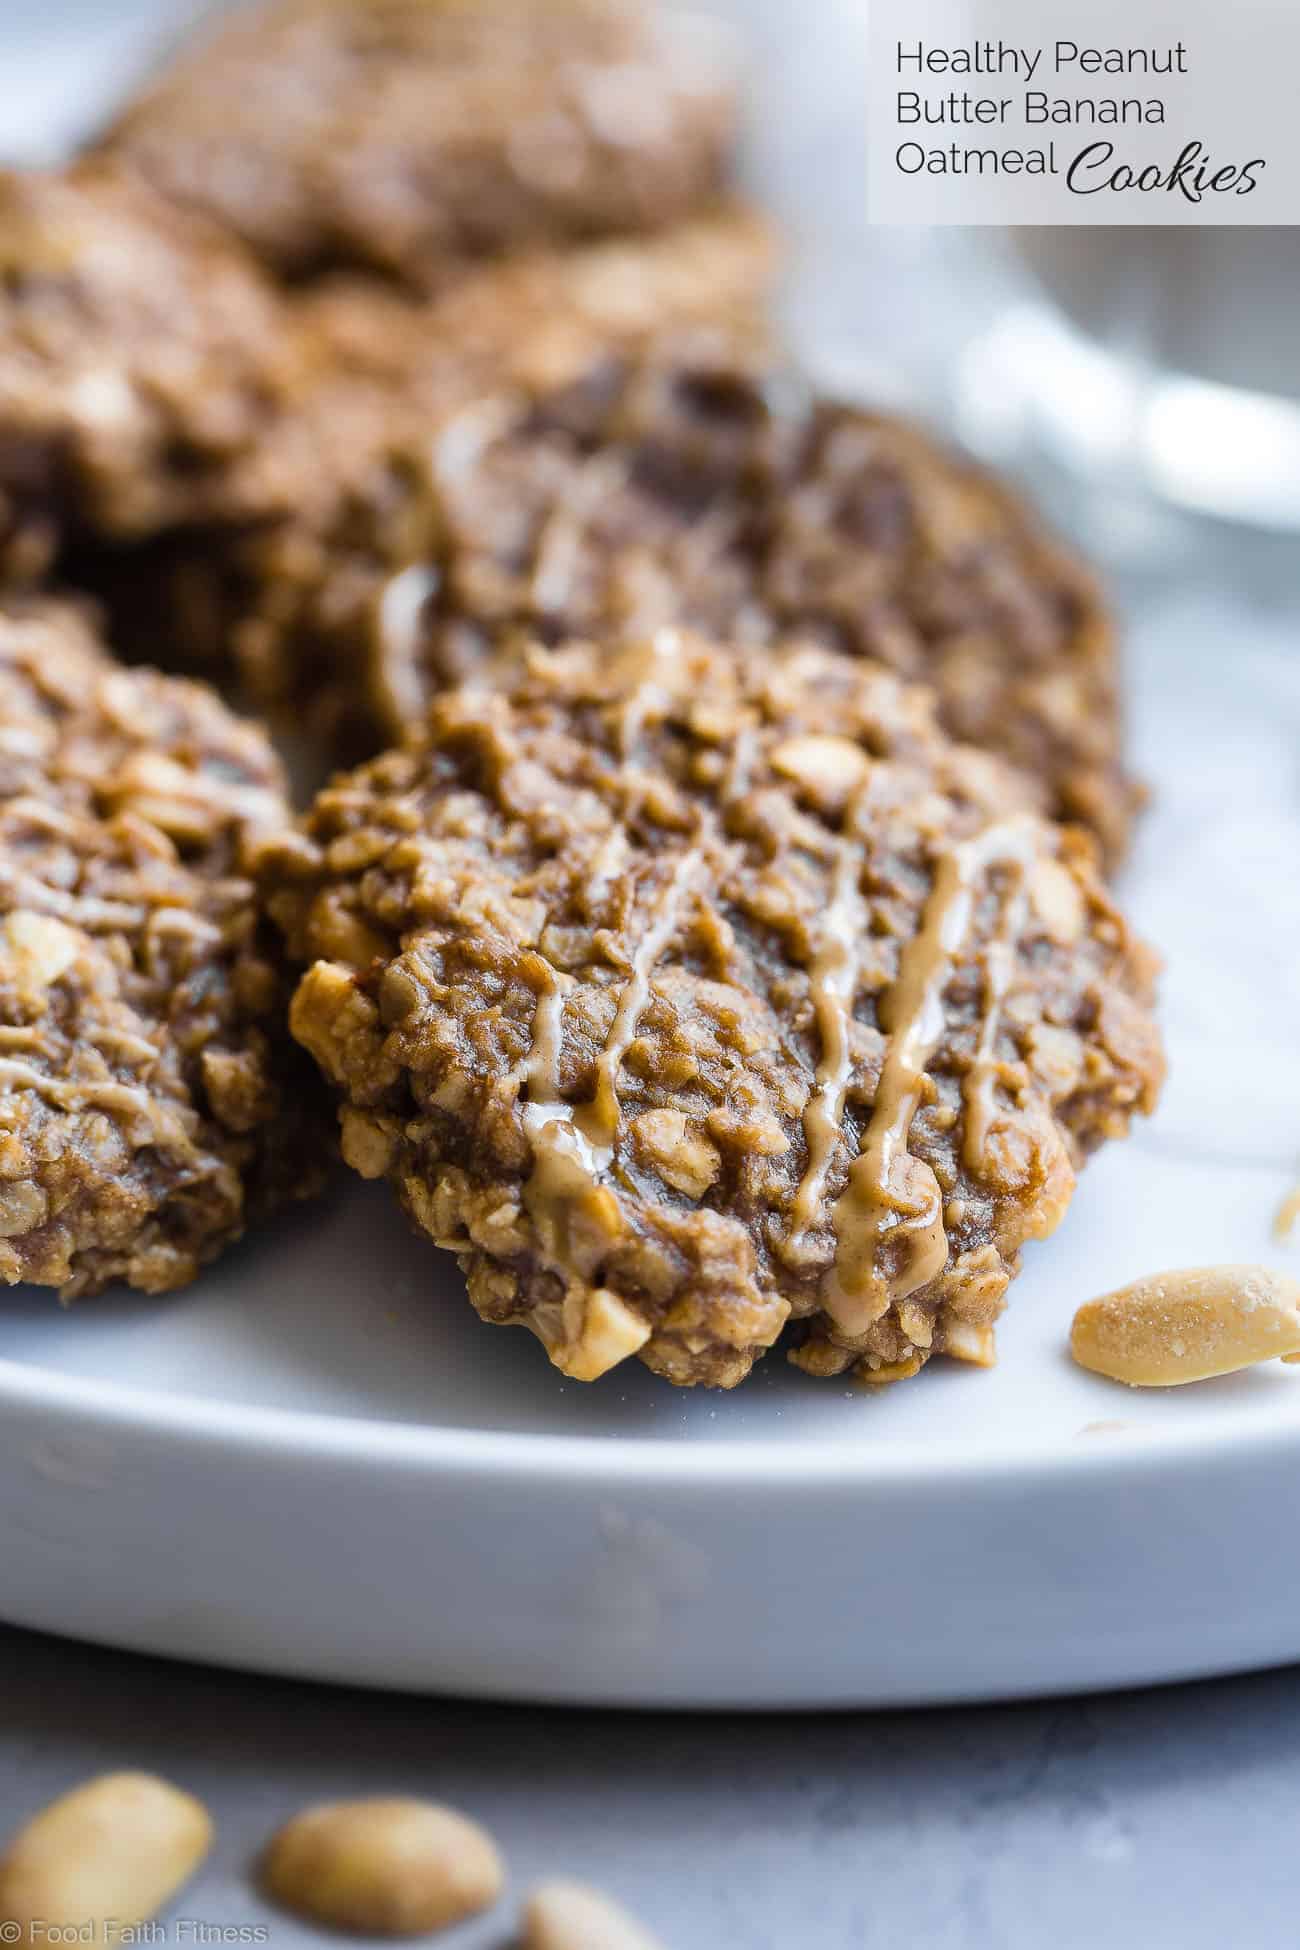 Healthy Peanut Butter Oatmeal Banana Cookies - These gluten free oatmeal cookies use only 5 simple ingredients and are dairy free and vegan friendly! A healthy treat for kids and adults that can be a breakfast or snack! | Foodfaithfitness.com | @FoodFaithFit